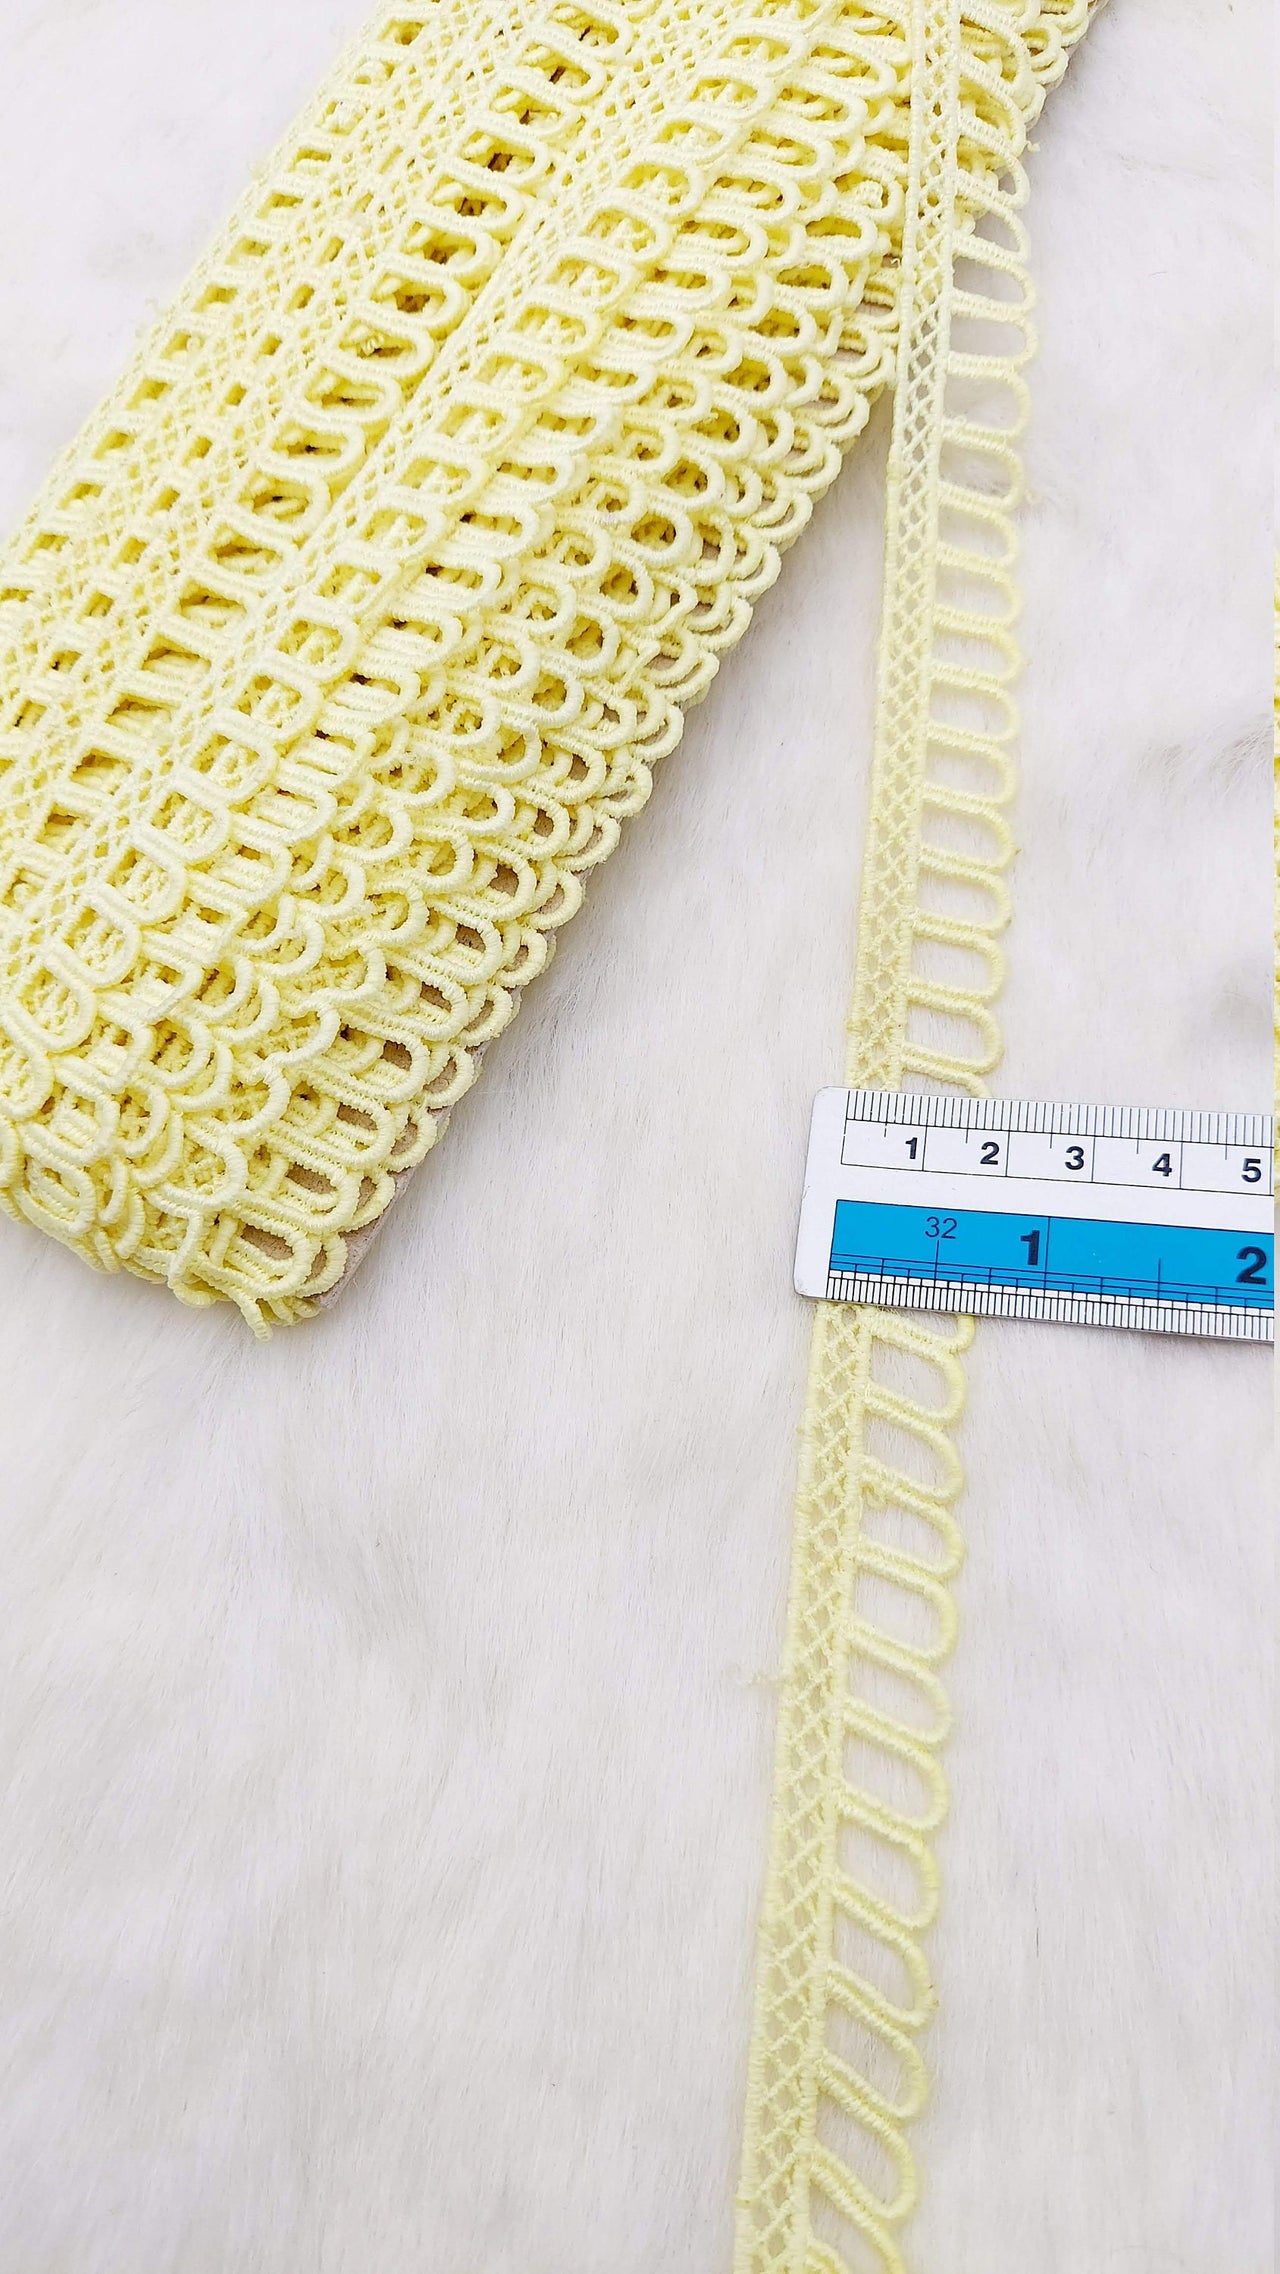 9 Yards Yellow Embroidery Cotton Lace Trim, Approx. 20mm Wide, Fringe Trim